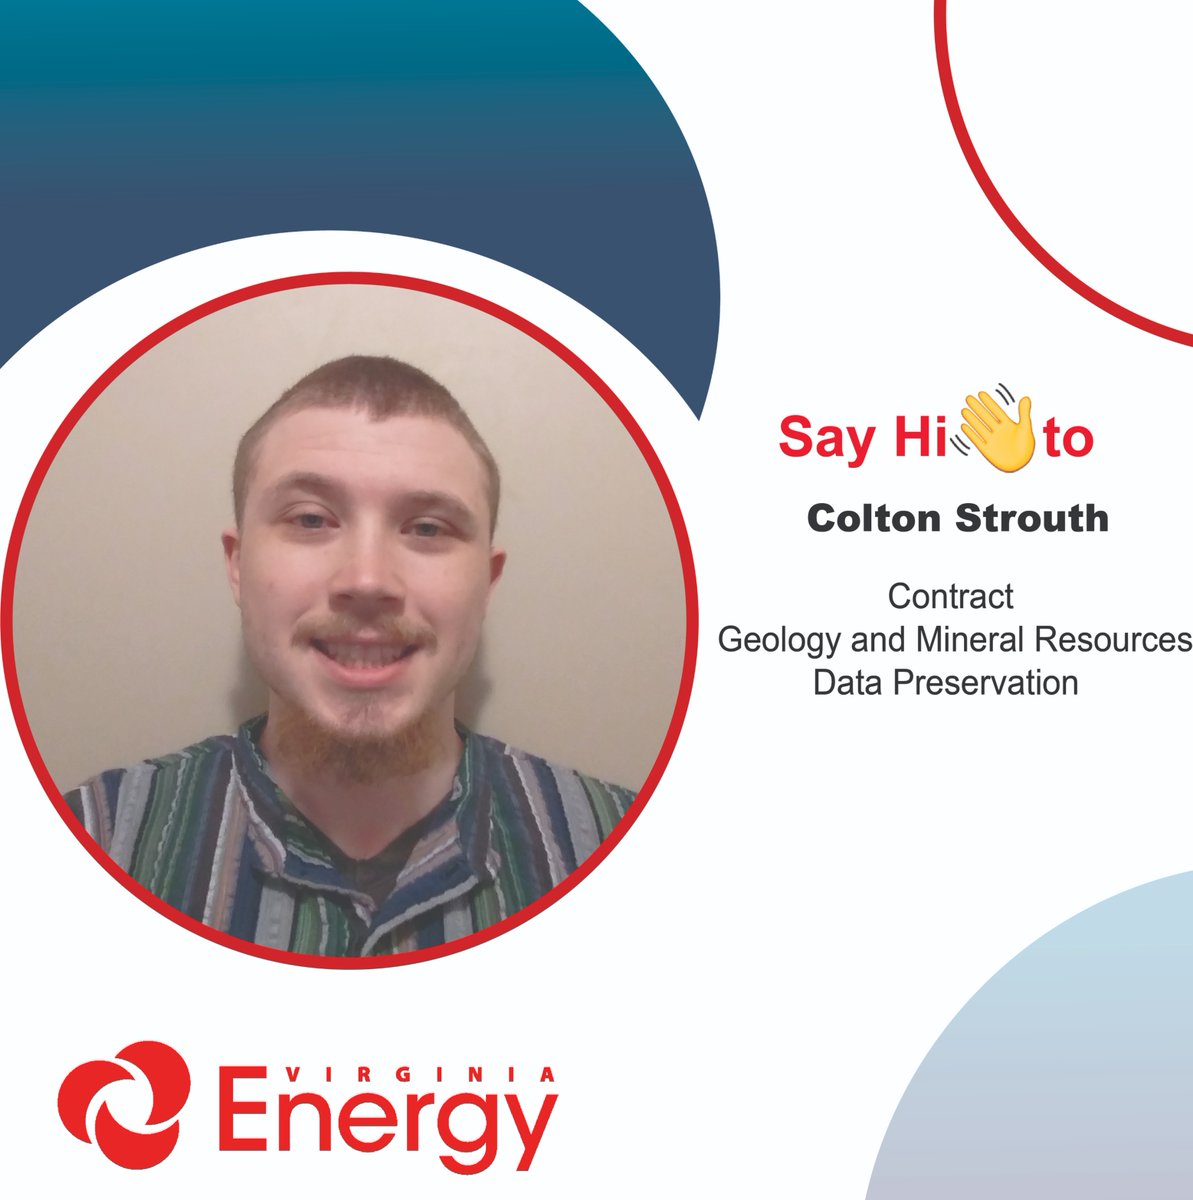 #VirginiaEnergy welcomes Colton Strouth! As a contractor, Colton will be working with our Geology and Mineral Resources Program.